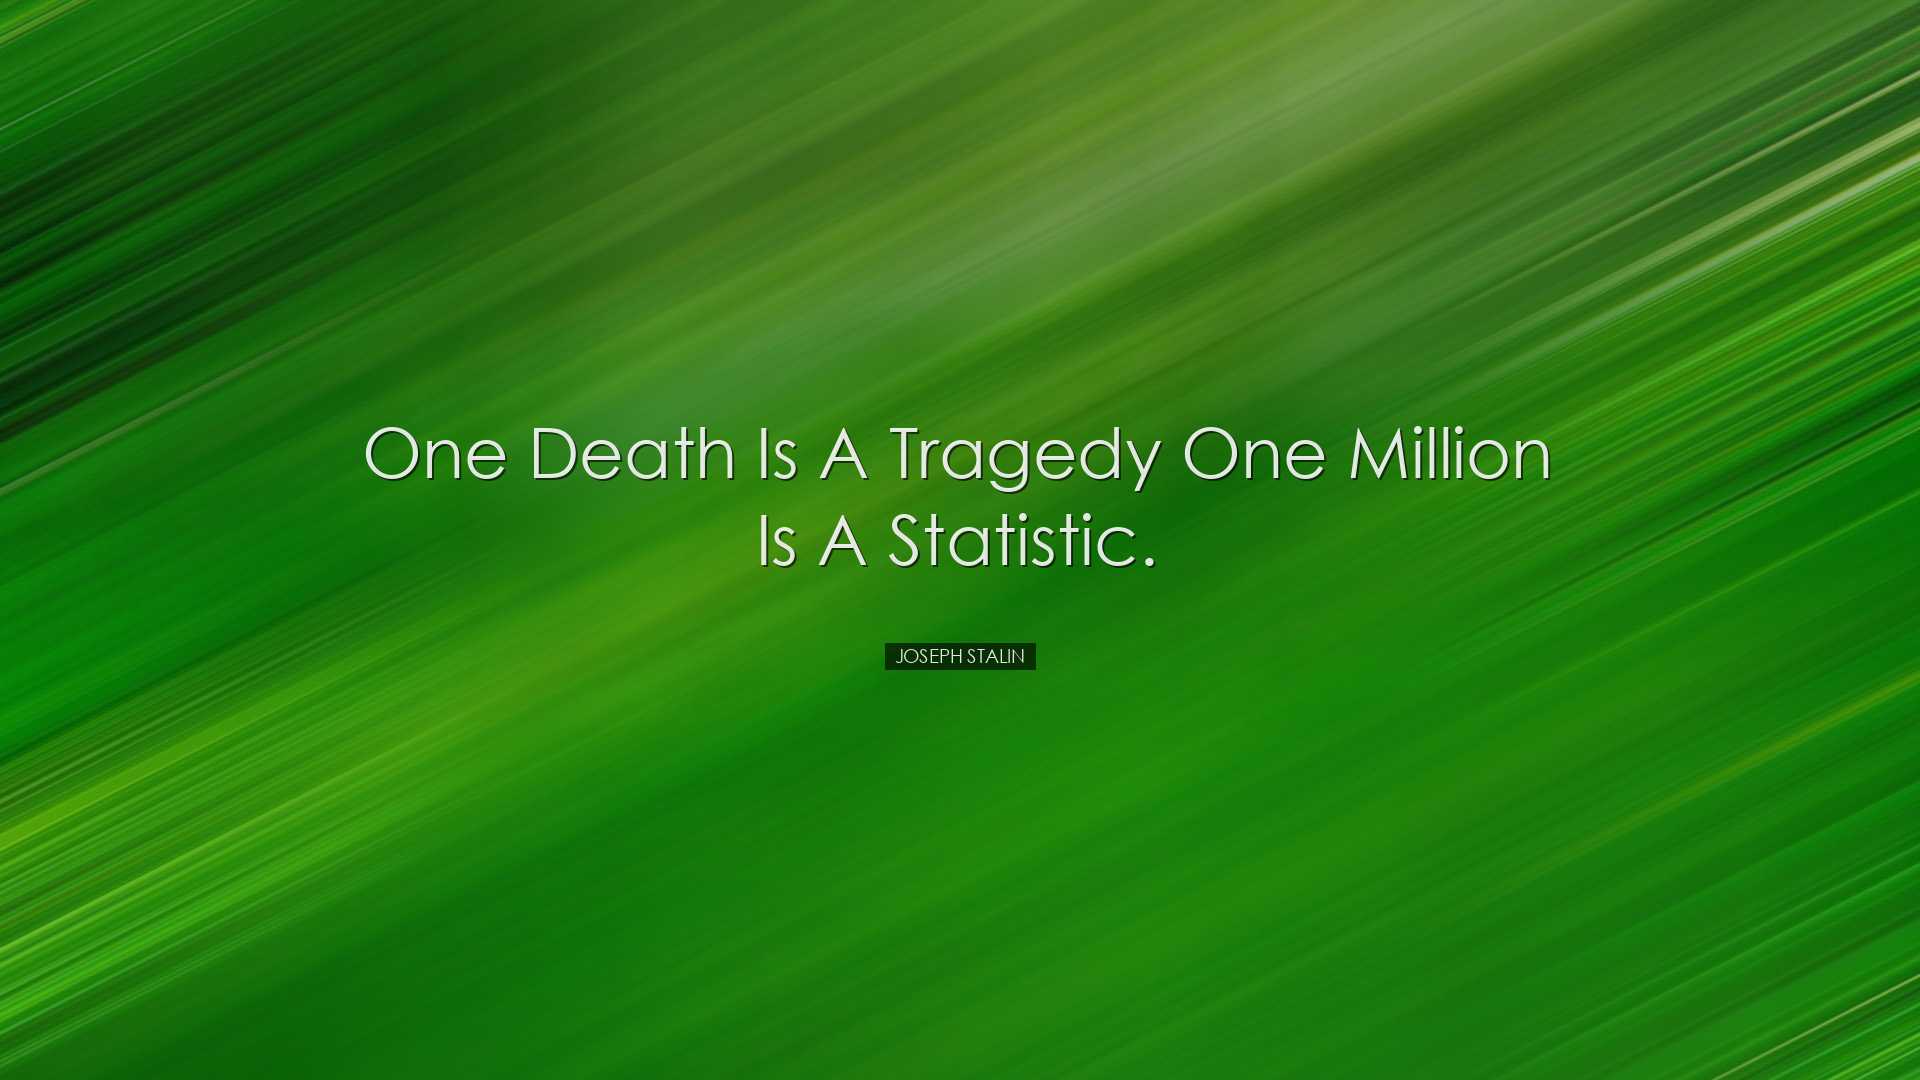 One death is a tragedy one million is a statistic. - Joseph Stalin